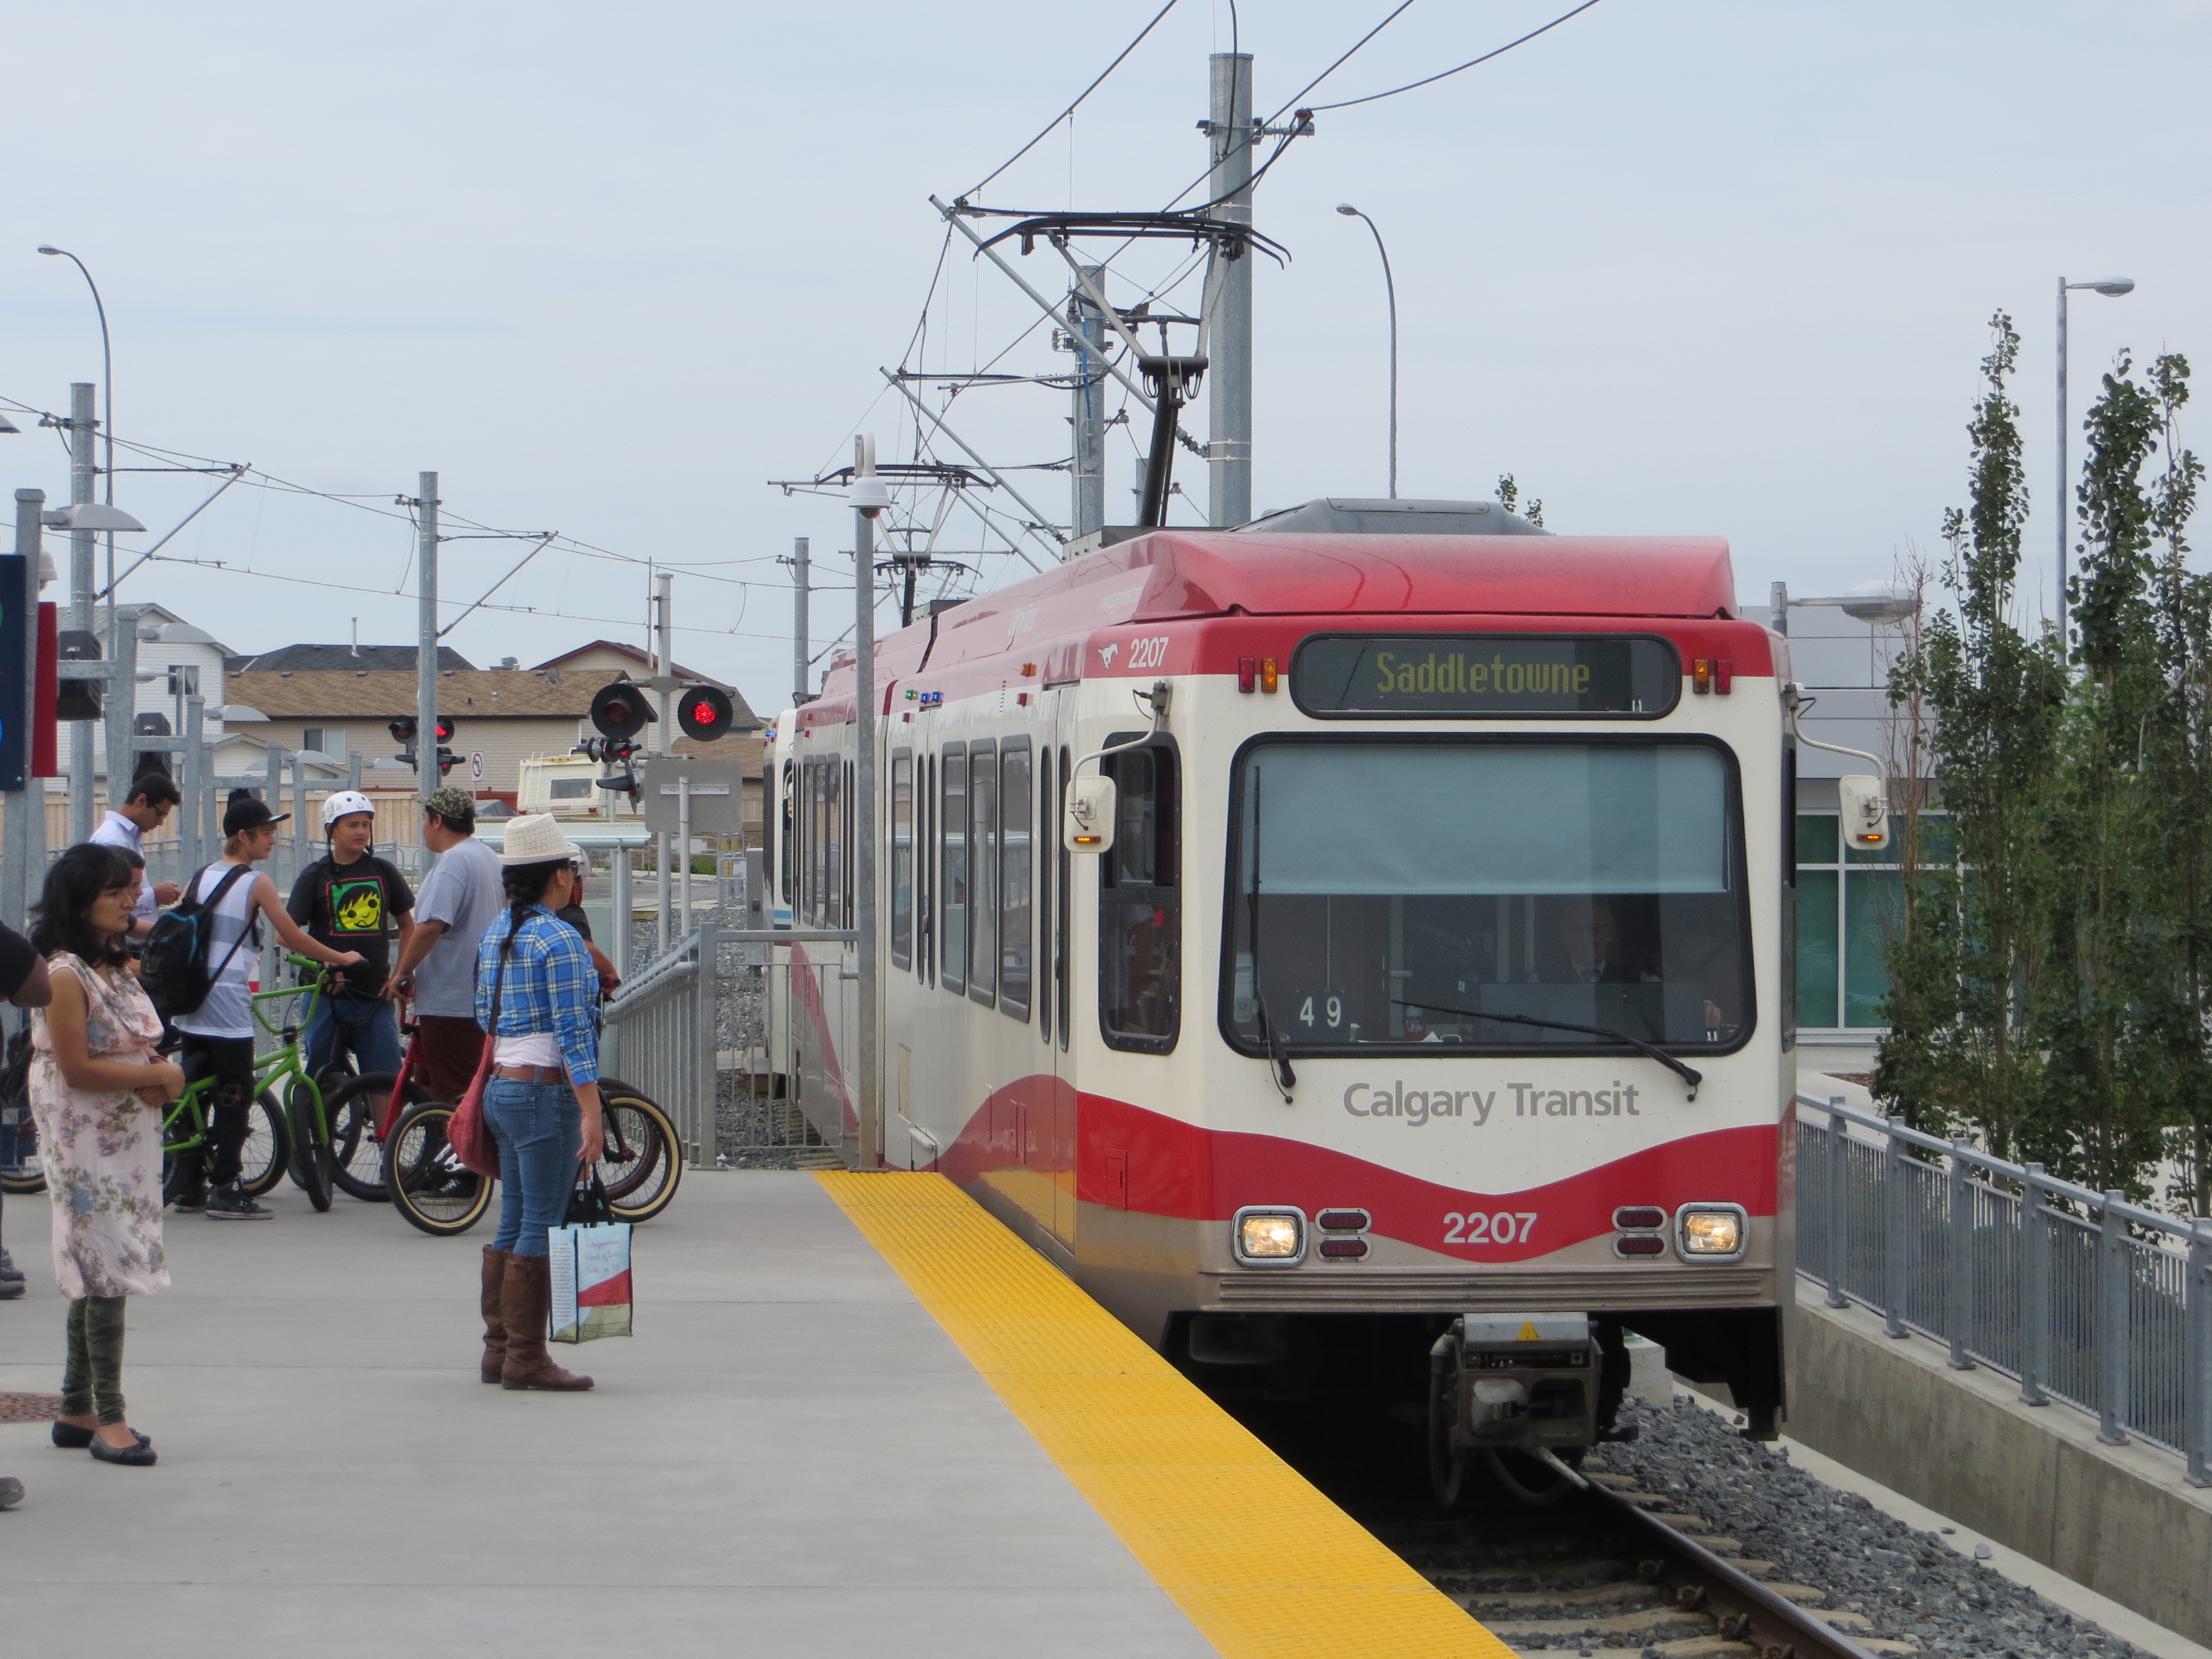 calgary-transit-officer-passes-out-after-possible-drug-exposure-at-train-station-infonews